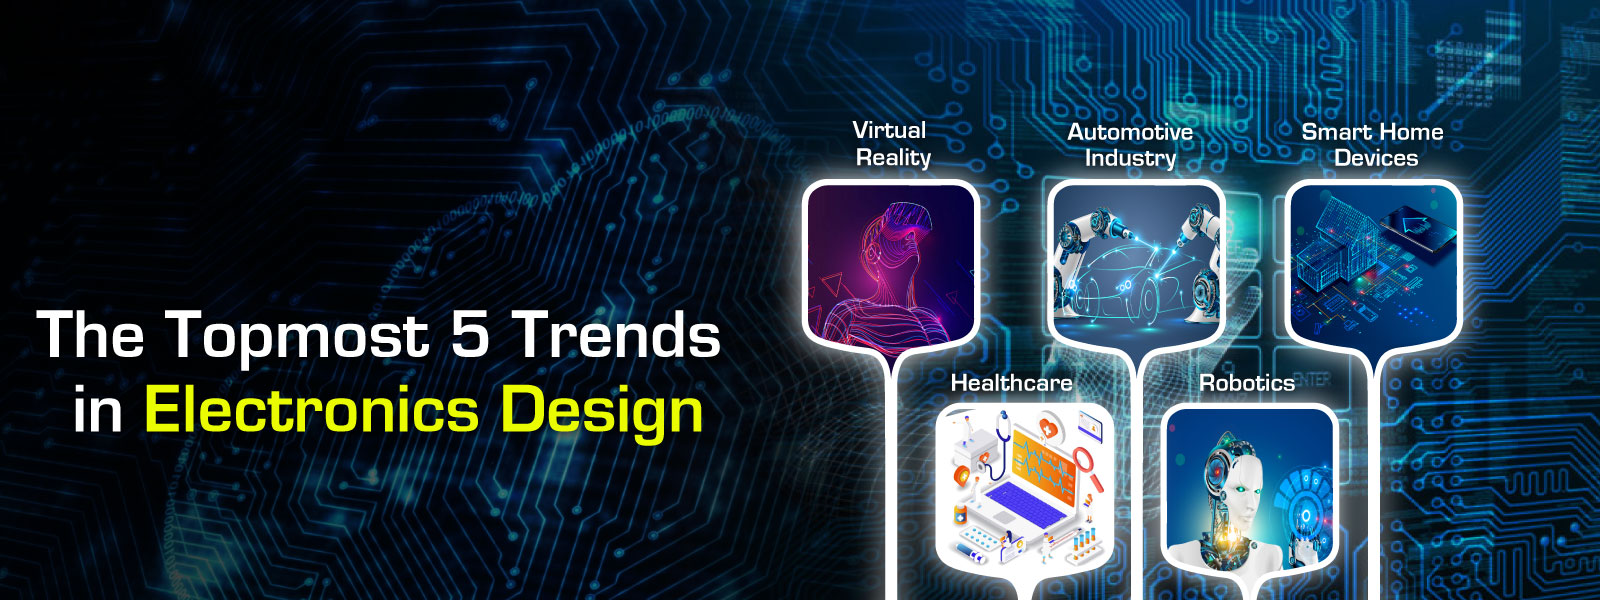 Top 5 Trends in the Electronics Industry V5 Semiconductors